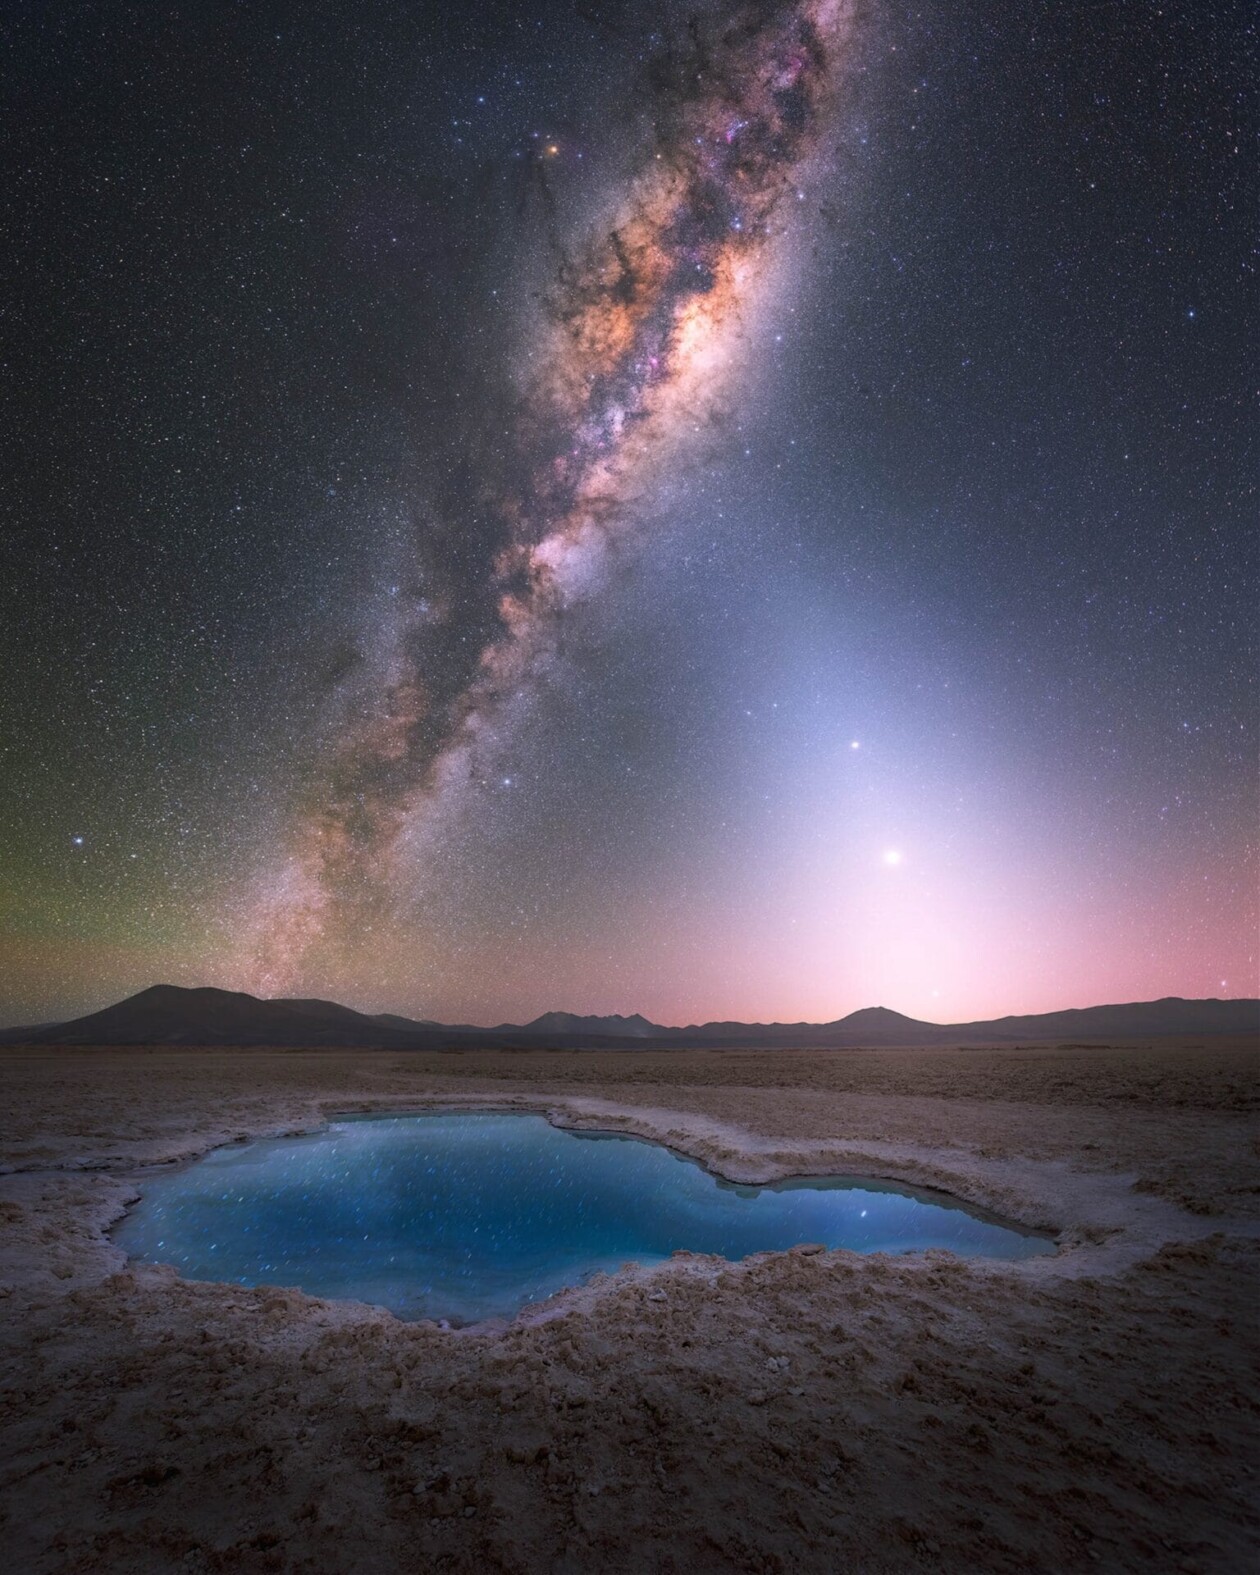 Capturing The Celestial Majesty In The Milky Way Photographer Of The Year Contest (7)